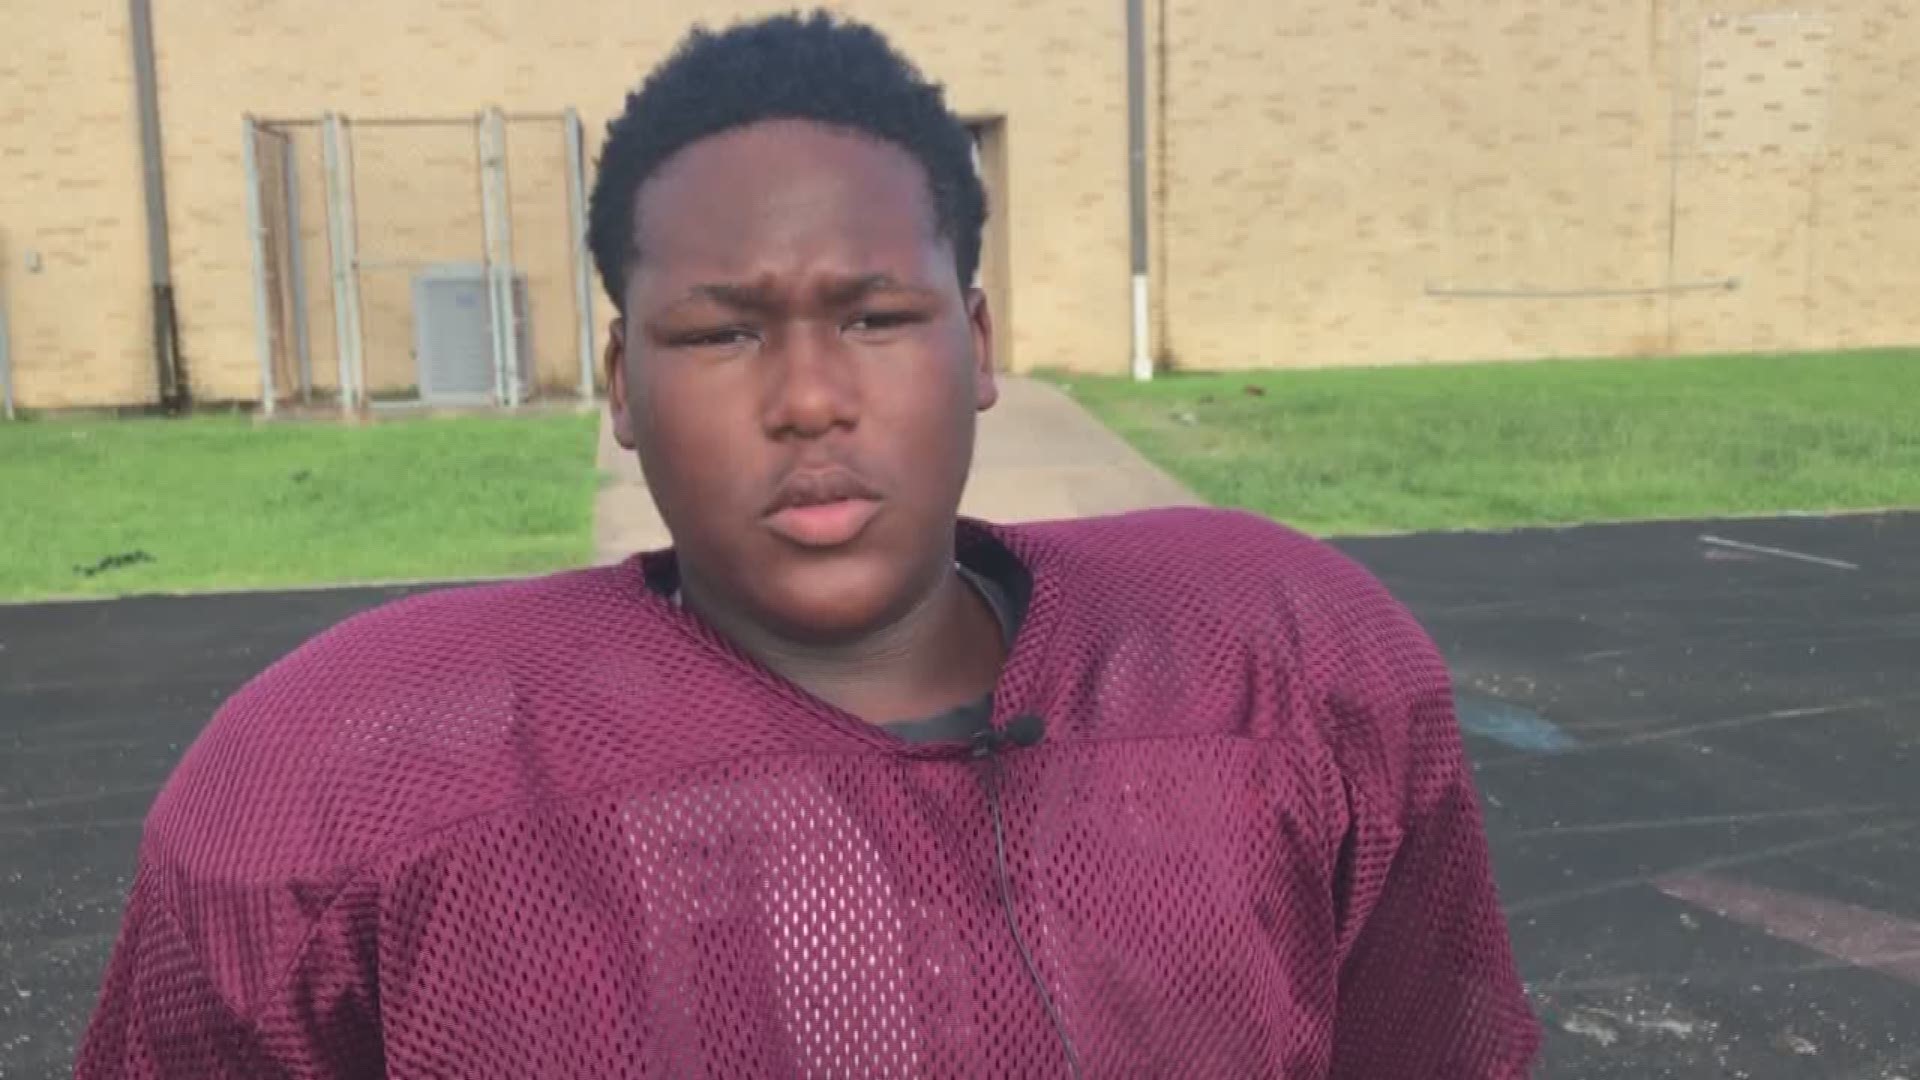 This Central High School football player works at HEB as a parking lot attendant. He always finds items left behind in shopping carts and he always turns them in to his manager like he's supposed to, even $1500 the other day.